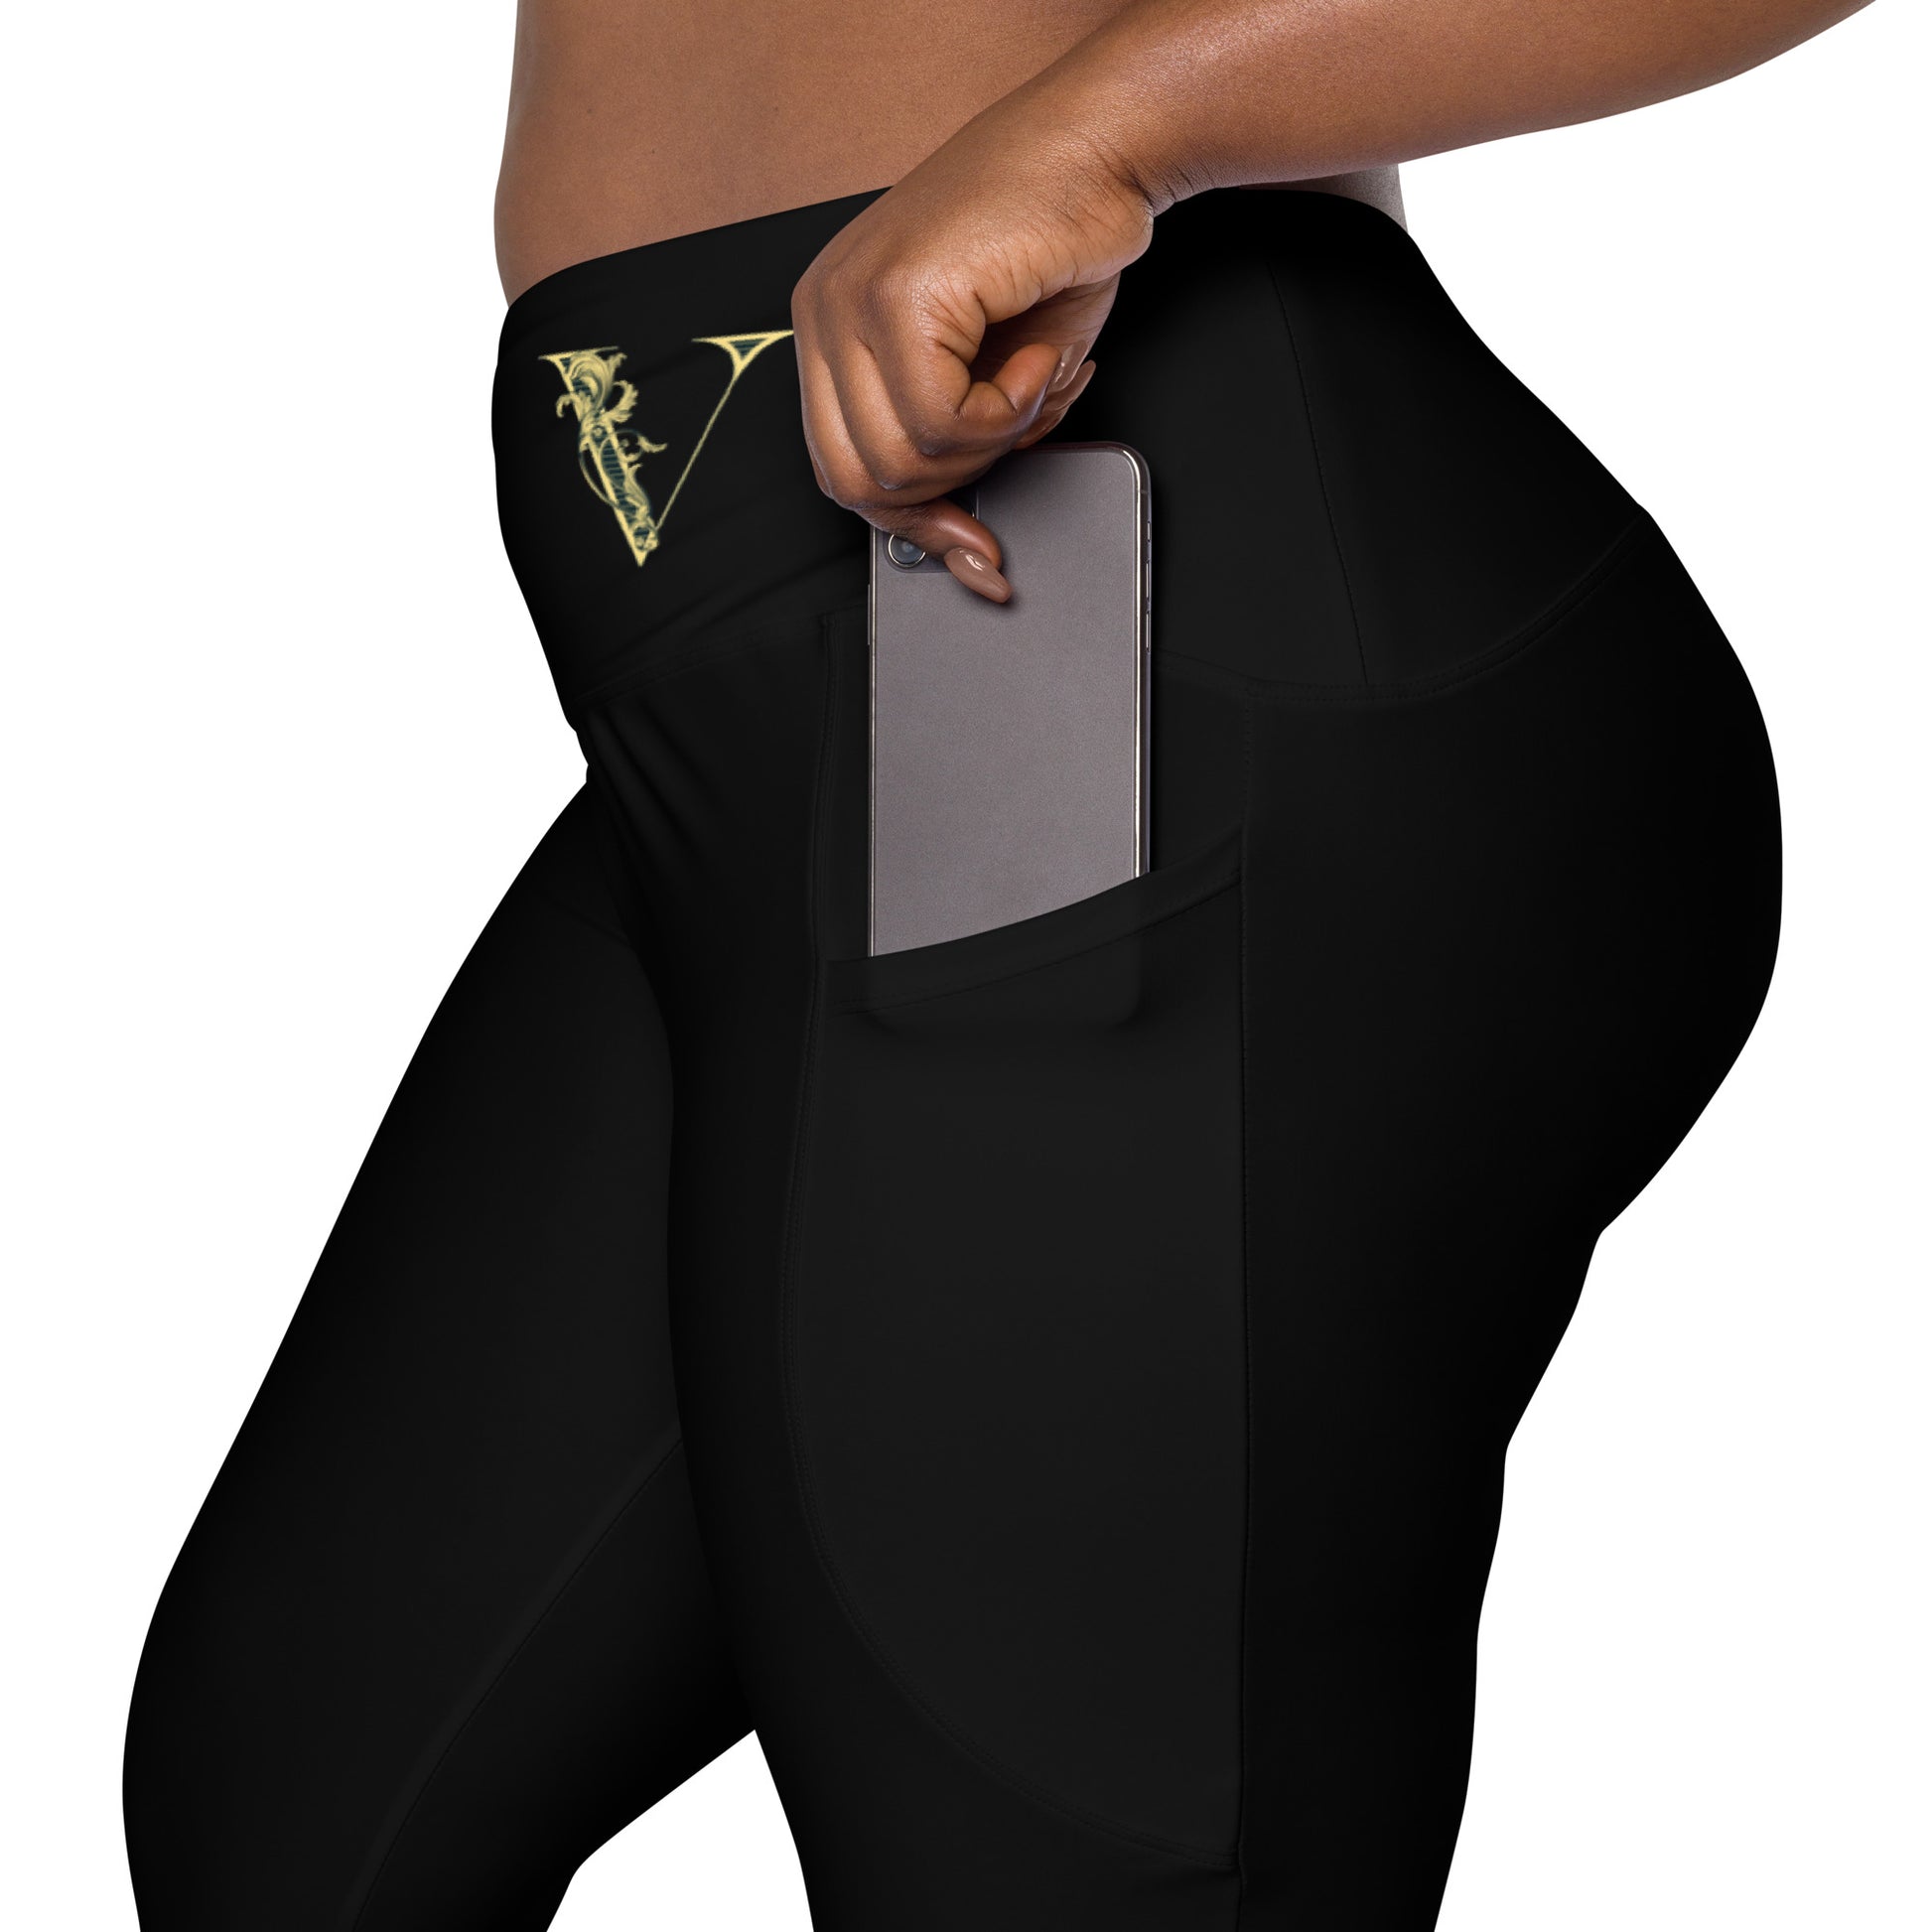 DIN Unruly - Crossover leggings with pockets – Valorous Vixen